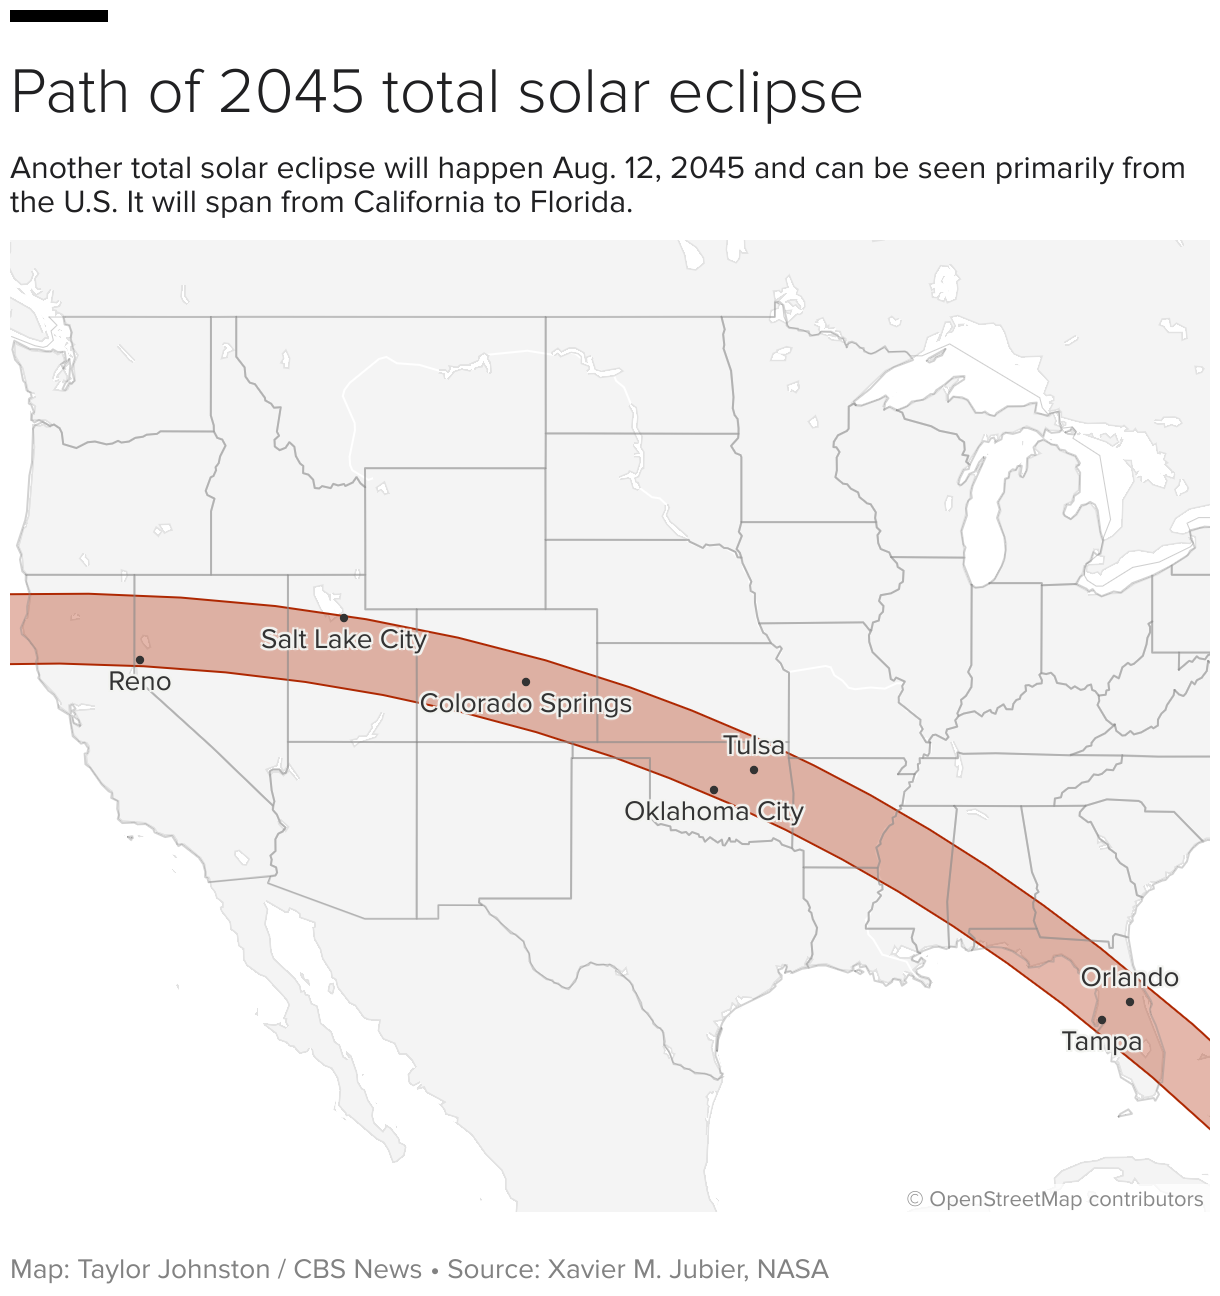 Eclipse cloud cover forecasts and maps show where skies will clear up